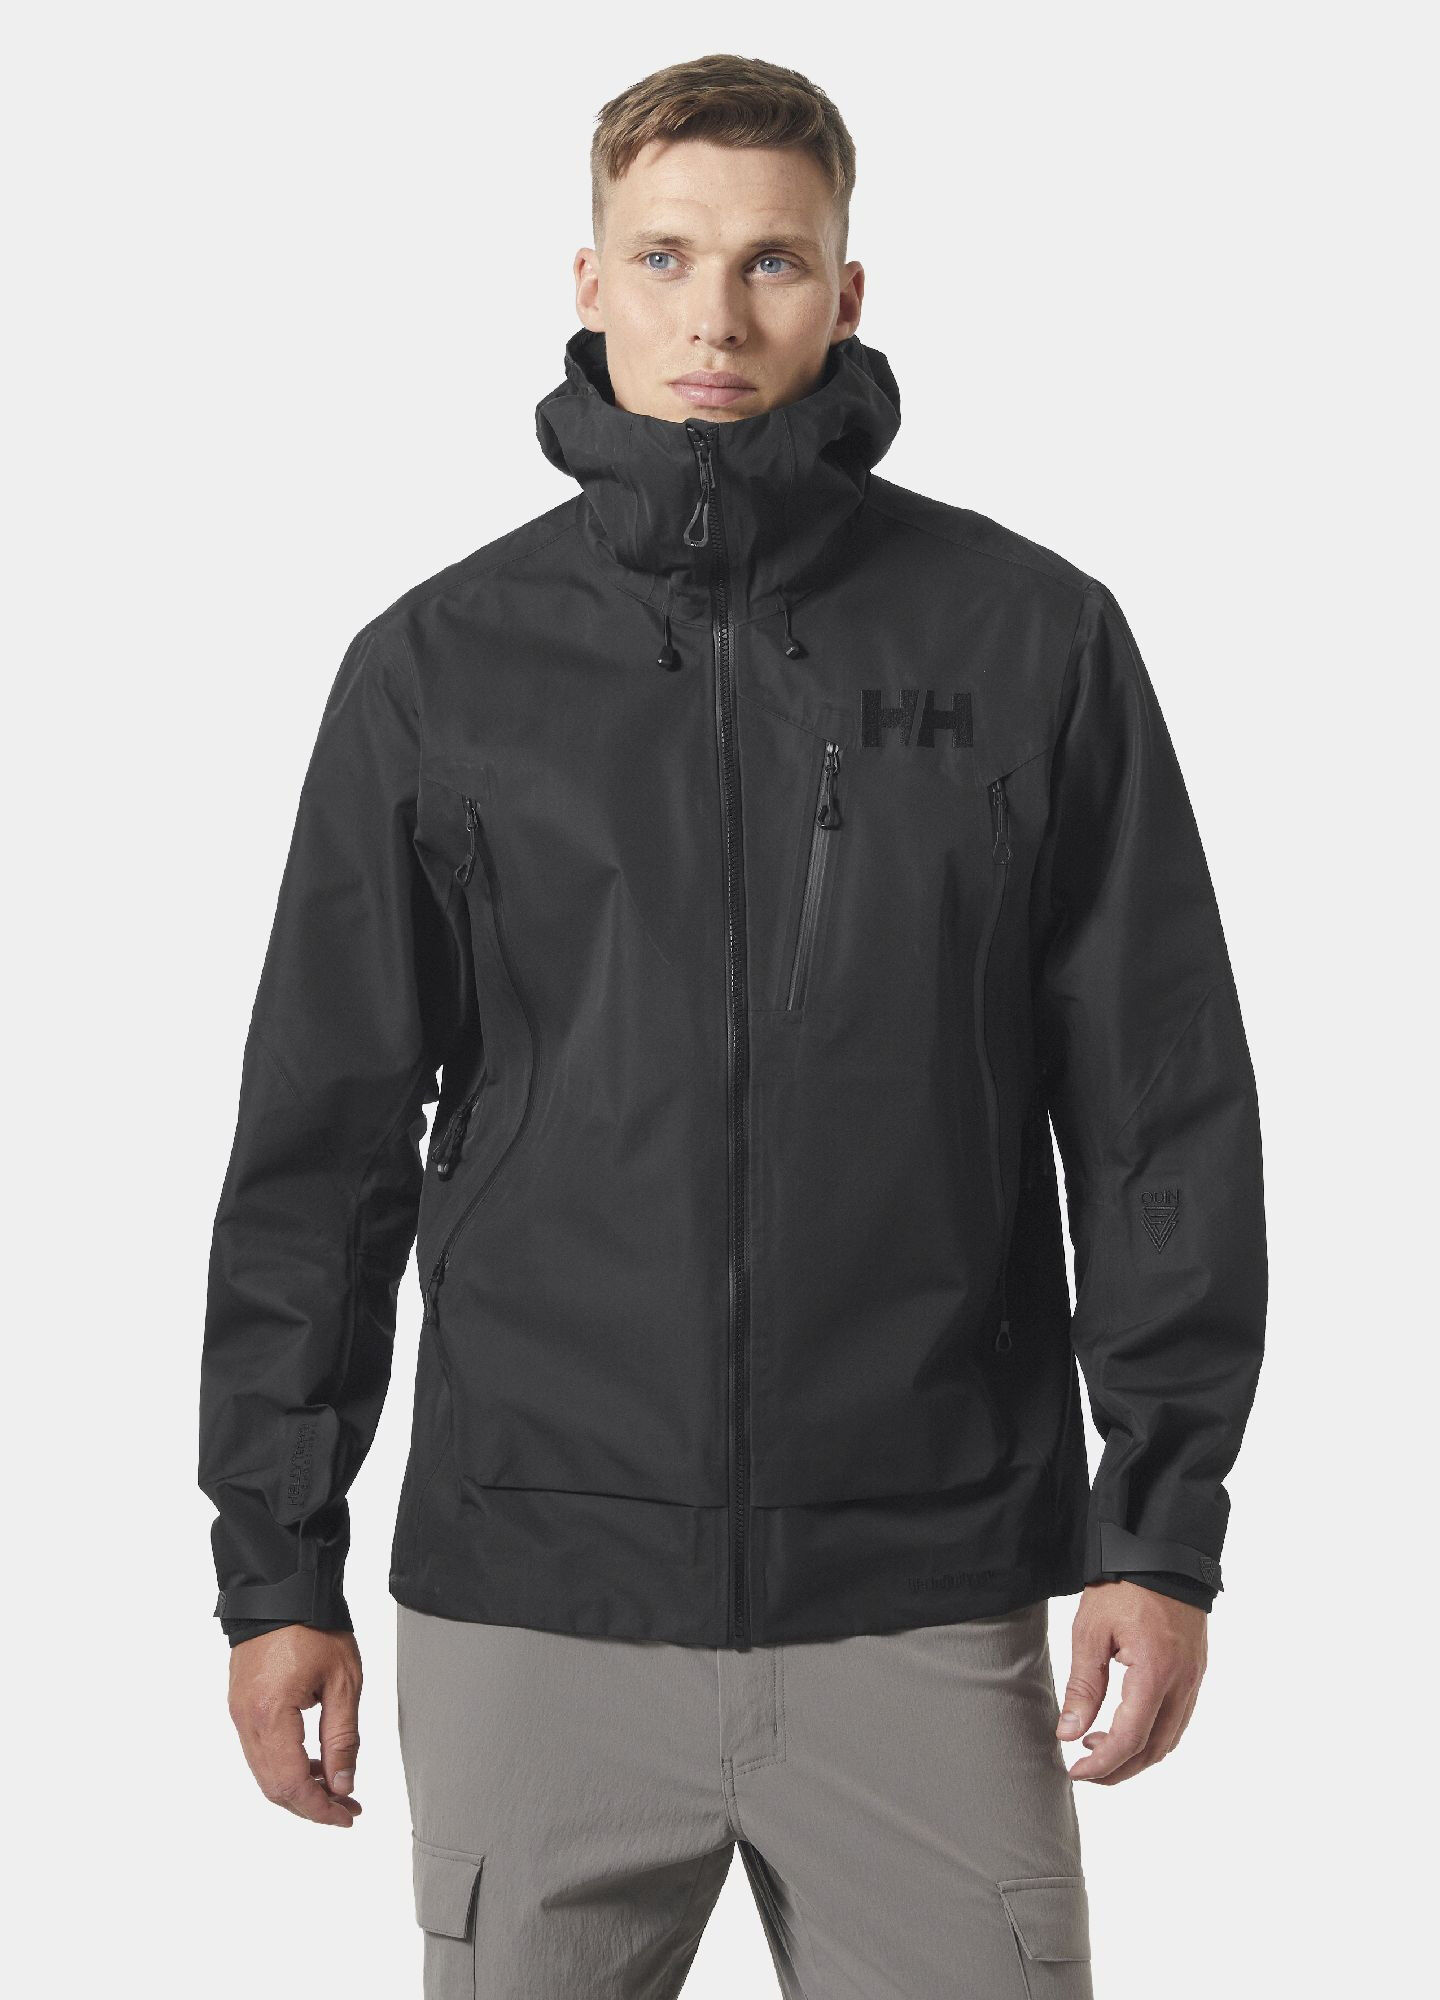 Helly Hansen Odin 9 Worlds Infinity Shell Jacket - Chaqueta impermeable - Hombre | Hardloop